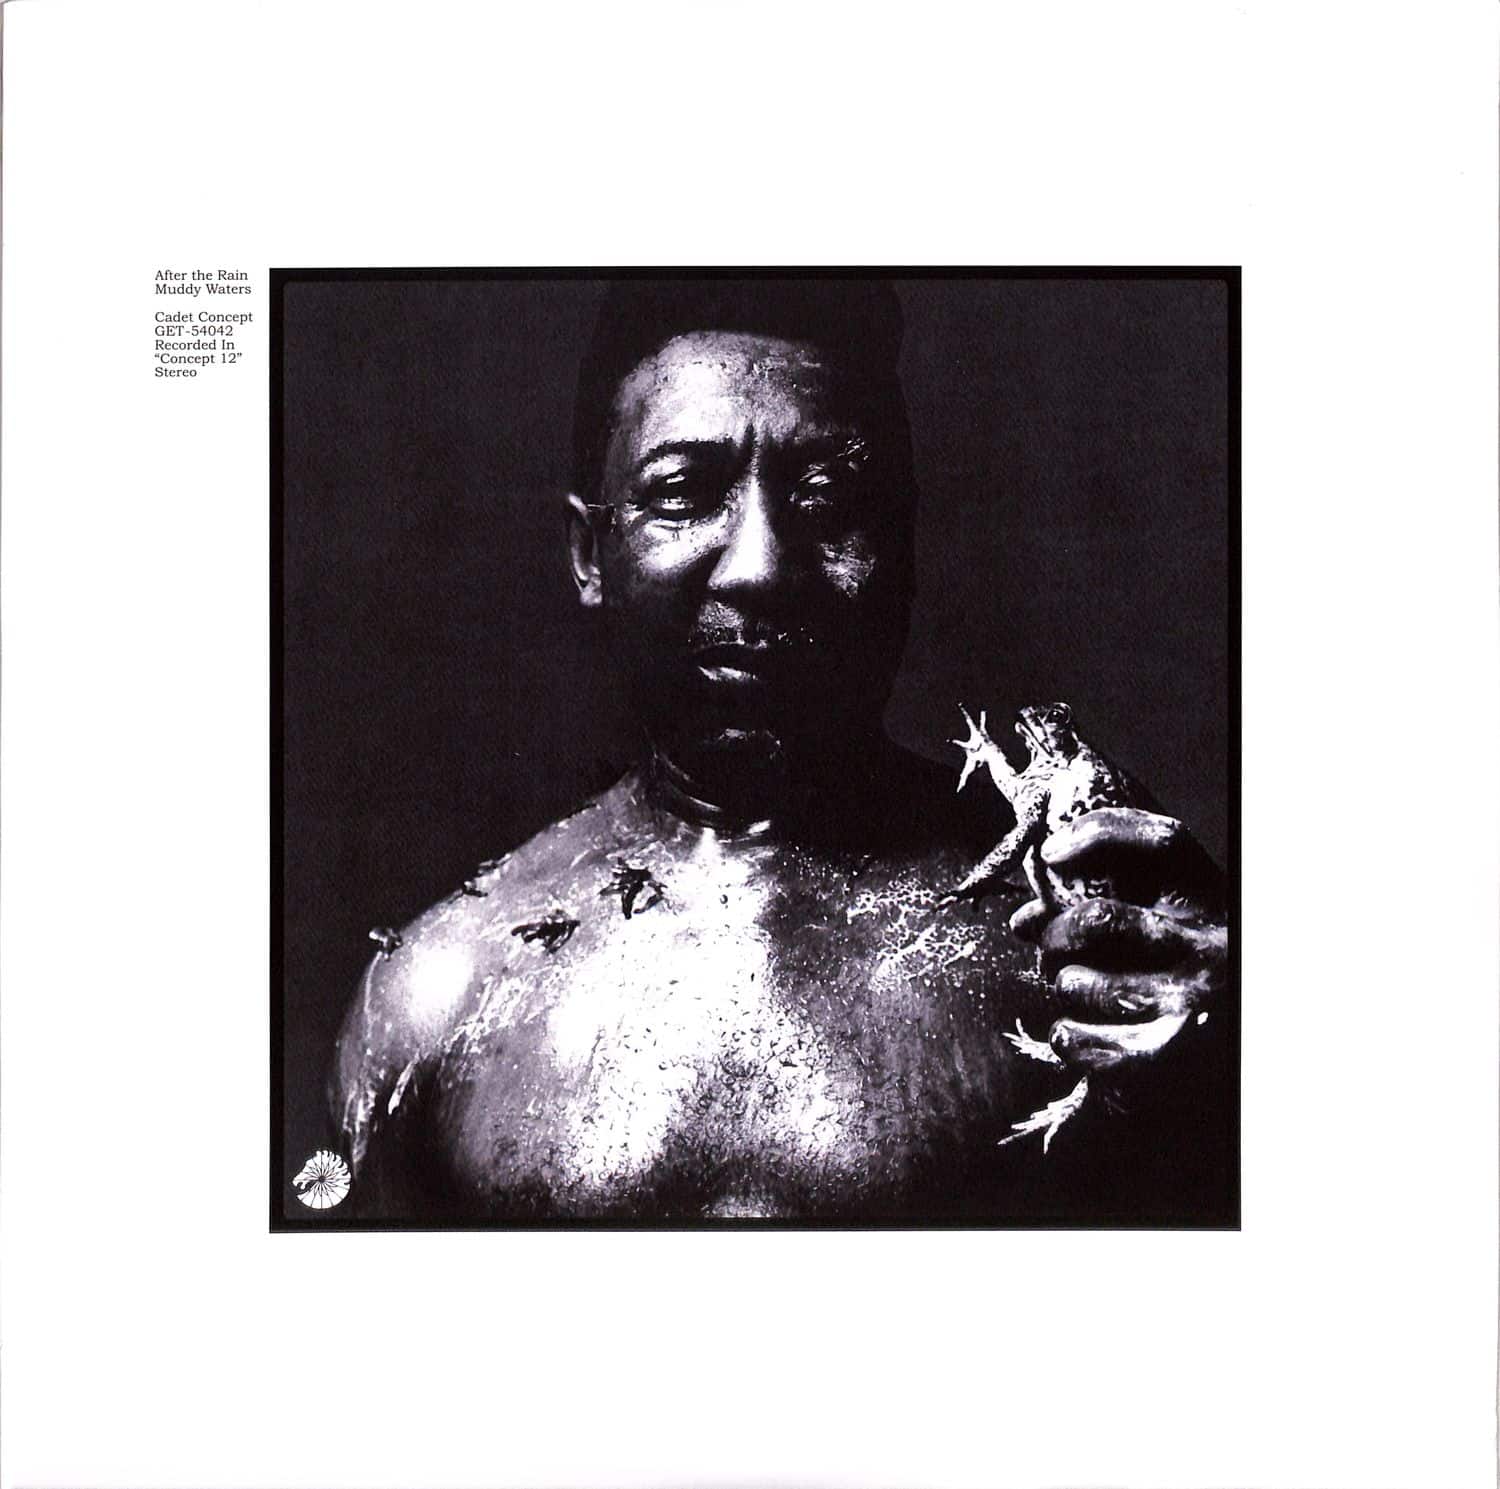 Muddy Waters - AFTER THE RAIN 